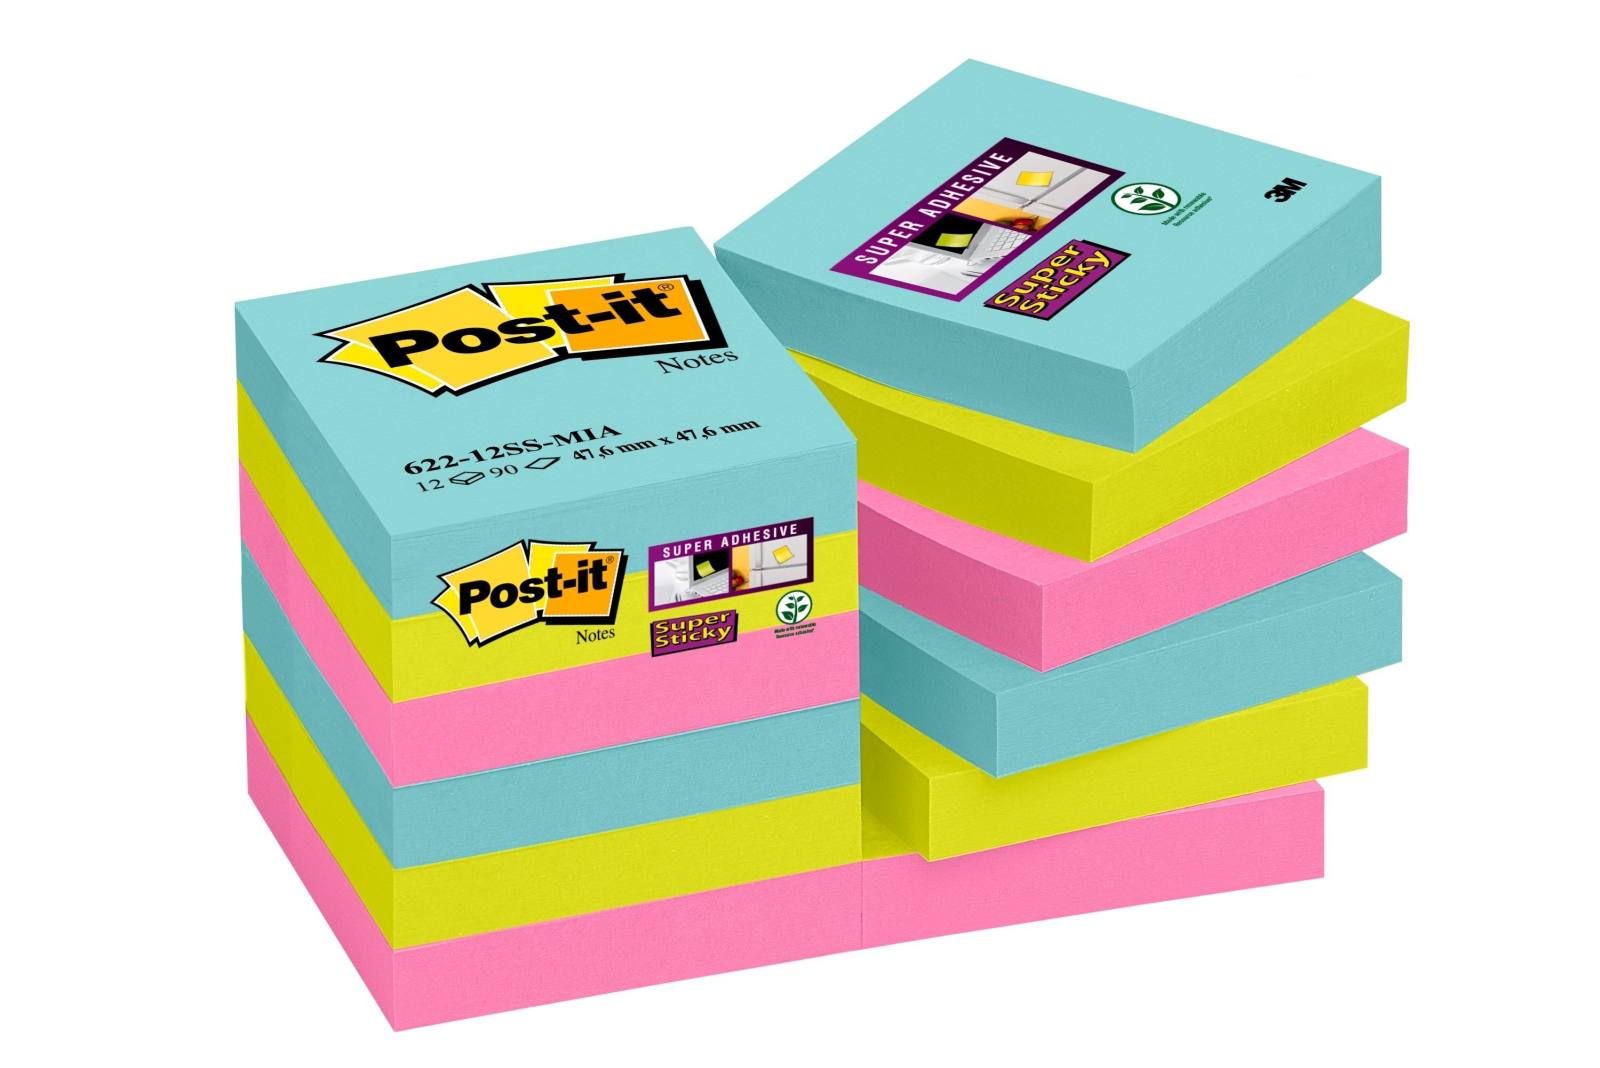 3M Post-it Super Sticky Notes 62212SMI, 48 mm x 48 mm, turquoise, neon green, neon pink, 12 pads of 90 sheets each